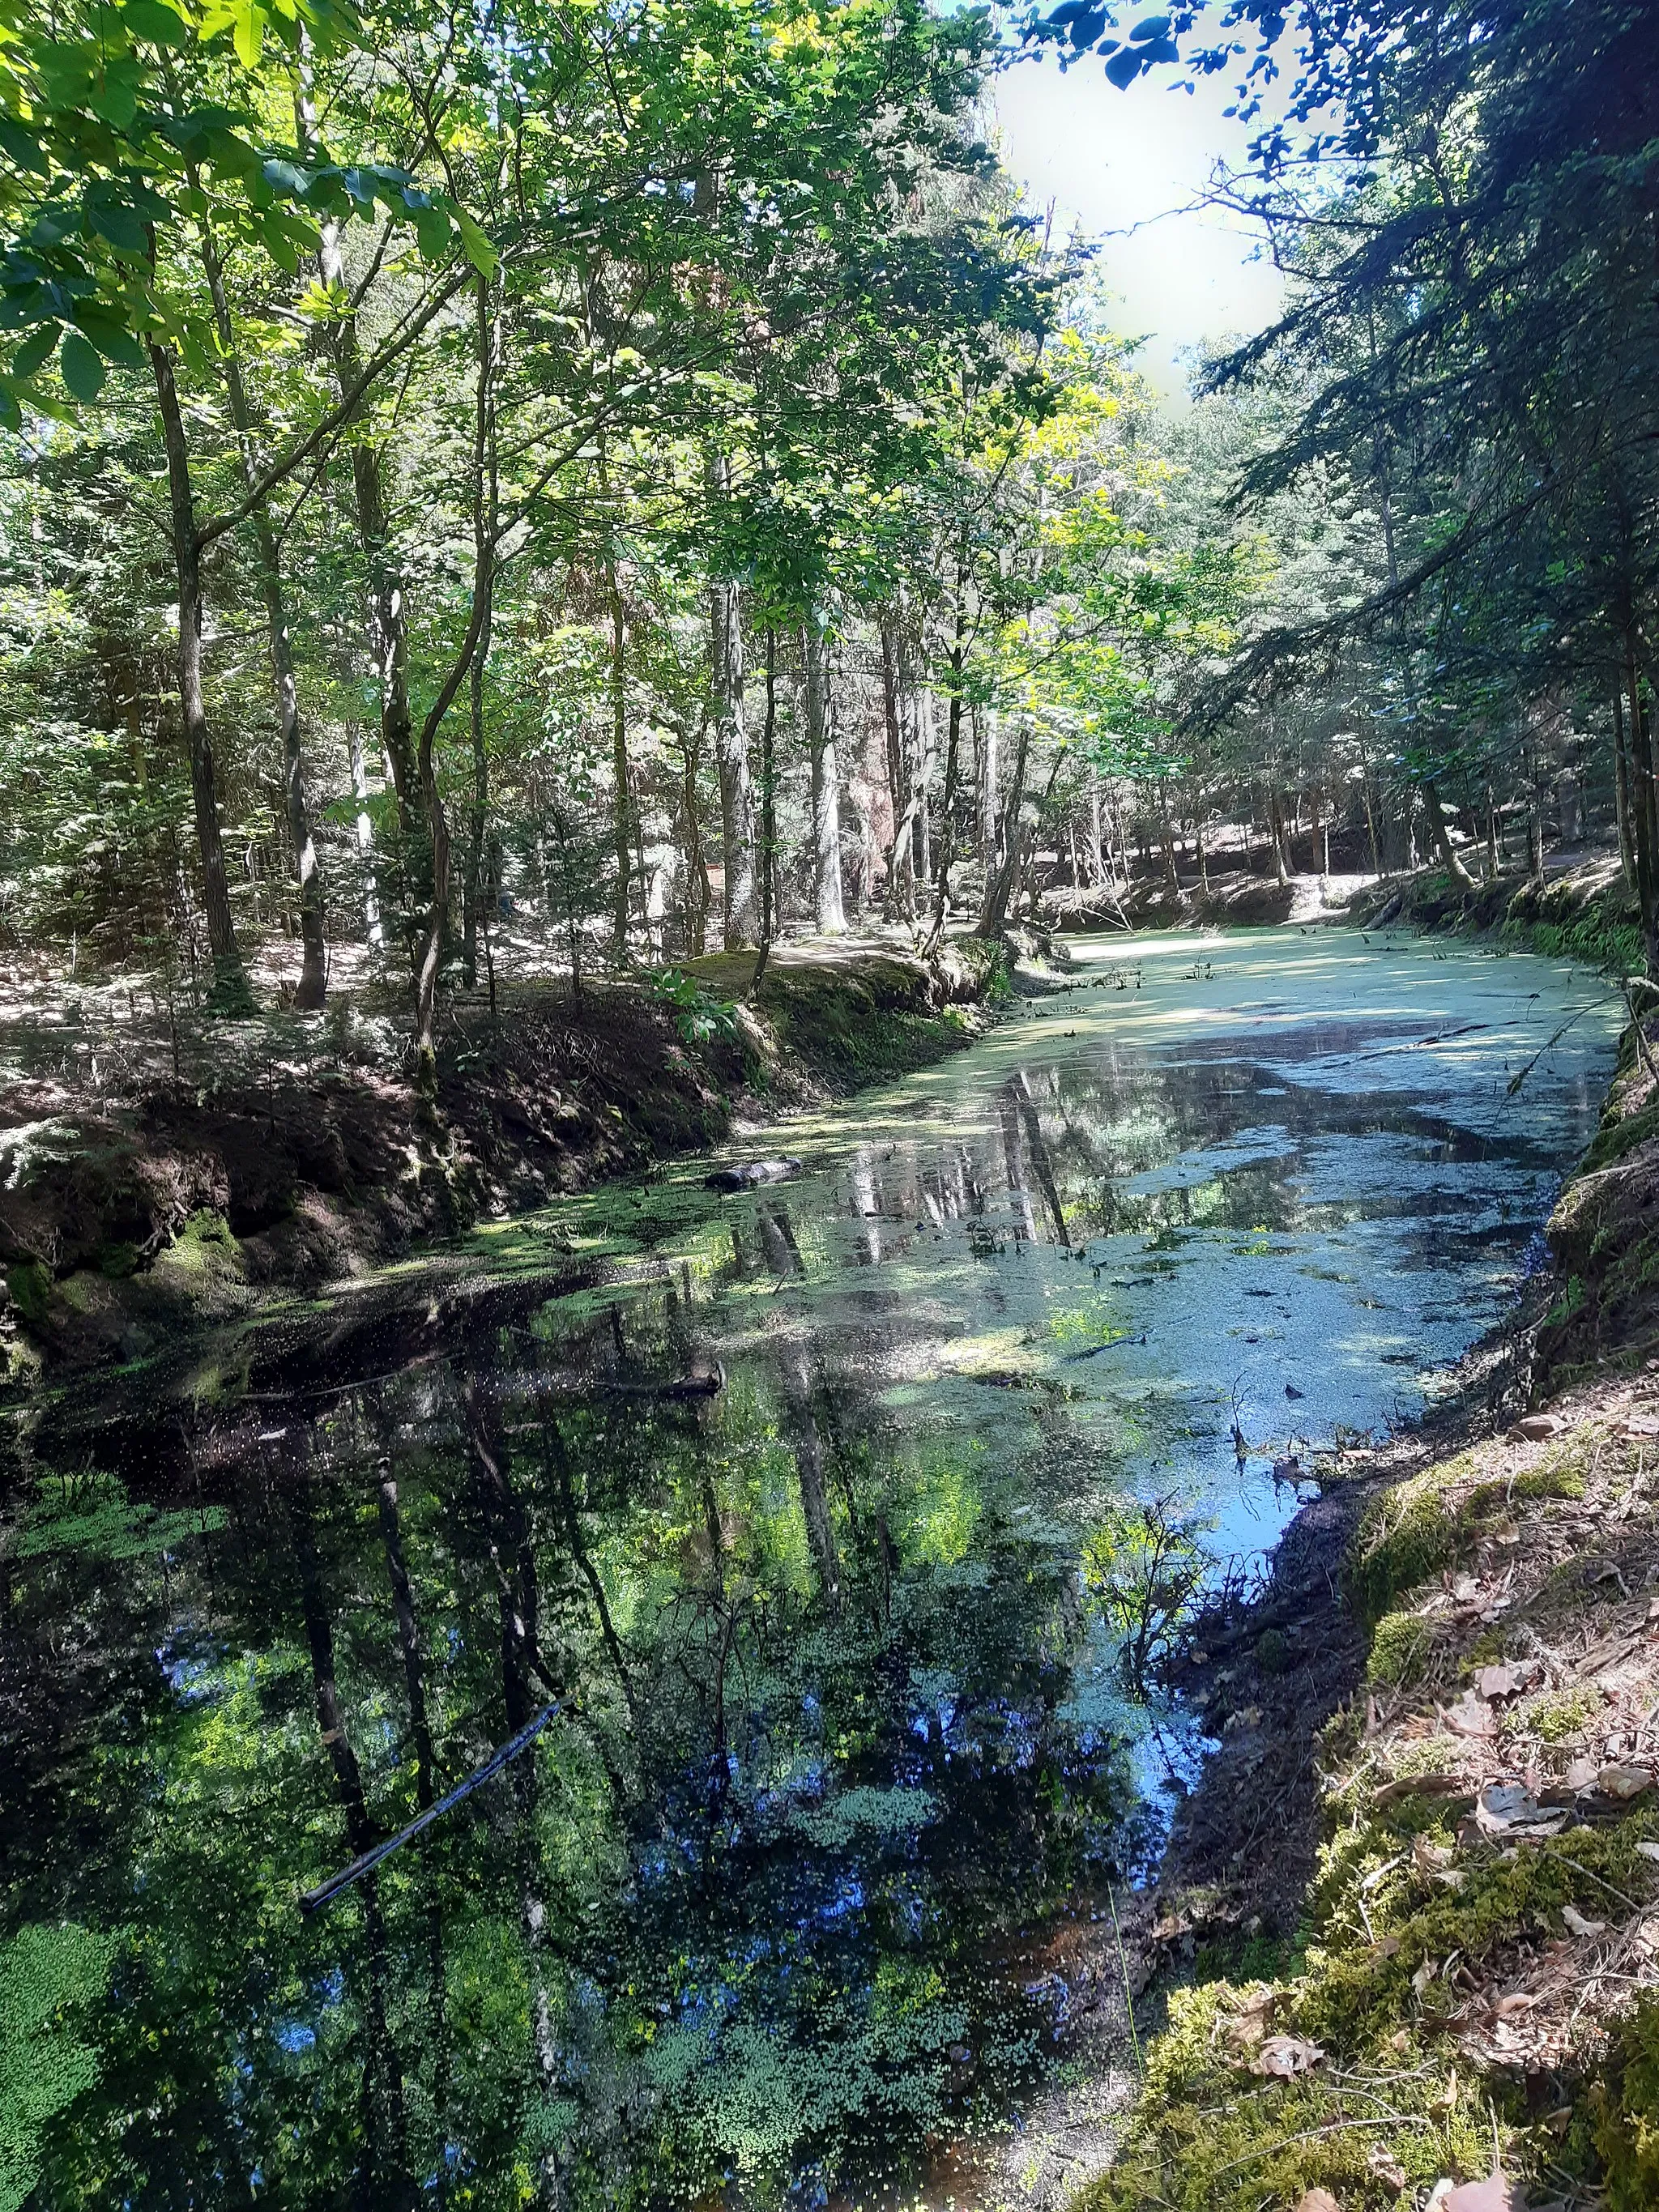 Photo showing: "Etang Herzog", artifical pond in the forest in the Vosges mountains near Husseren-les-Châteaux (Haut-Rhin, France). Breeding site for amphibians, including alpine newt and palmate newt.